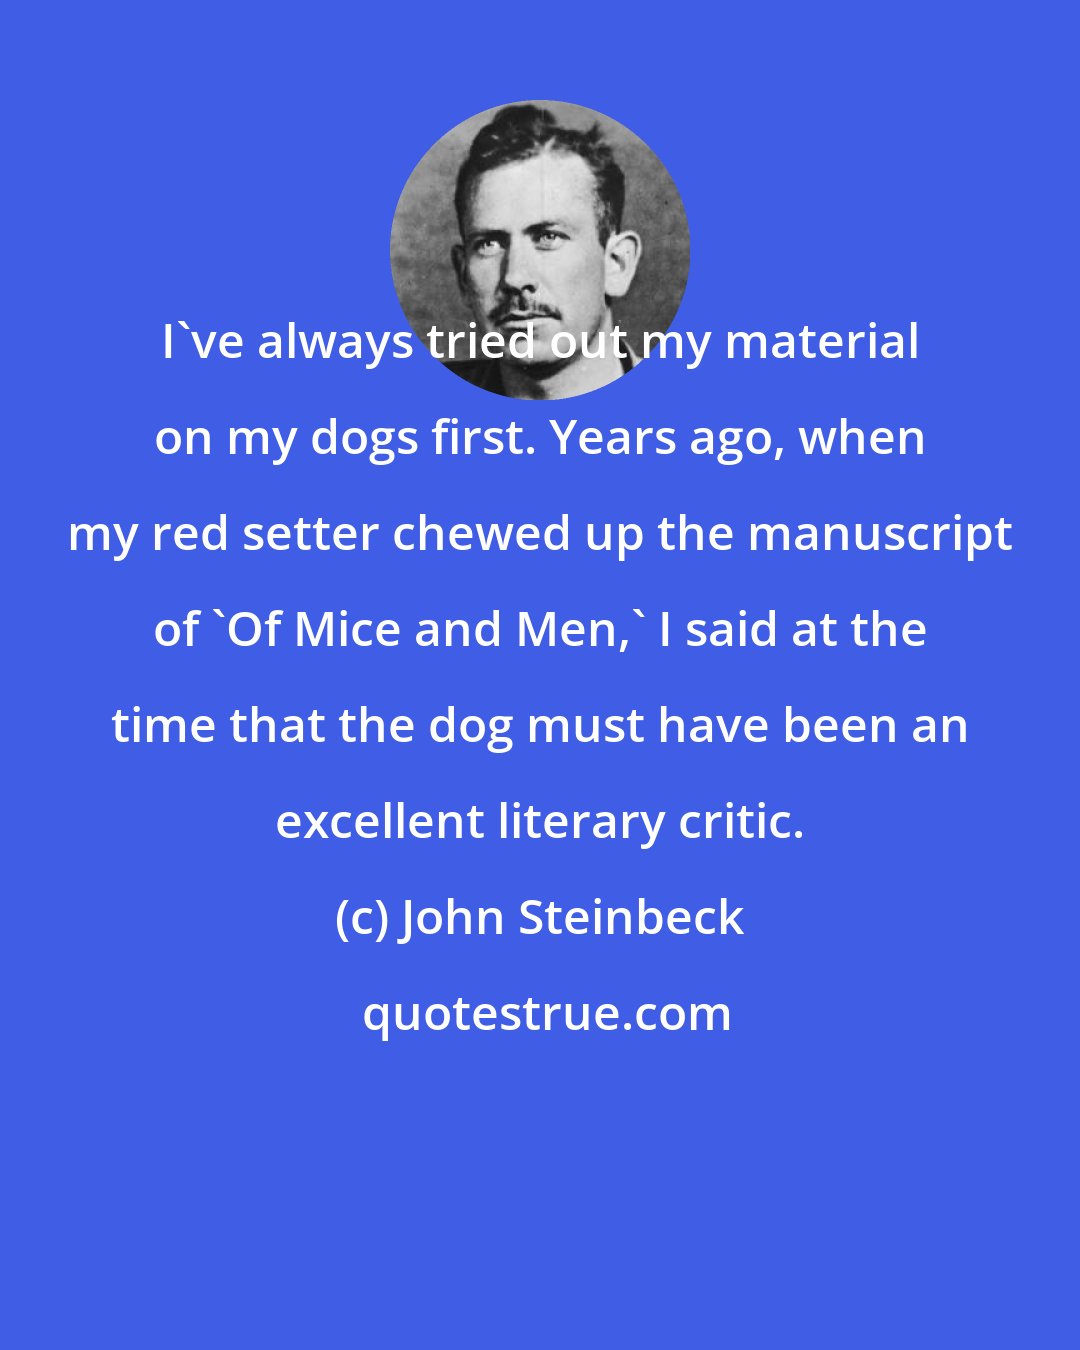 John Steinbeck: I've always tried out my material on my dogs first. Years ago, when my red setter chewed up the manuscript of 'Of Mice and Men,' I said at the time that the dog must have been an excellent literary critic.